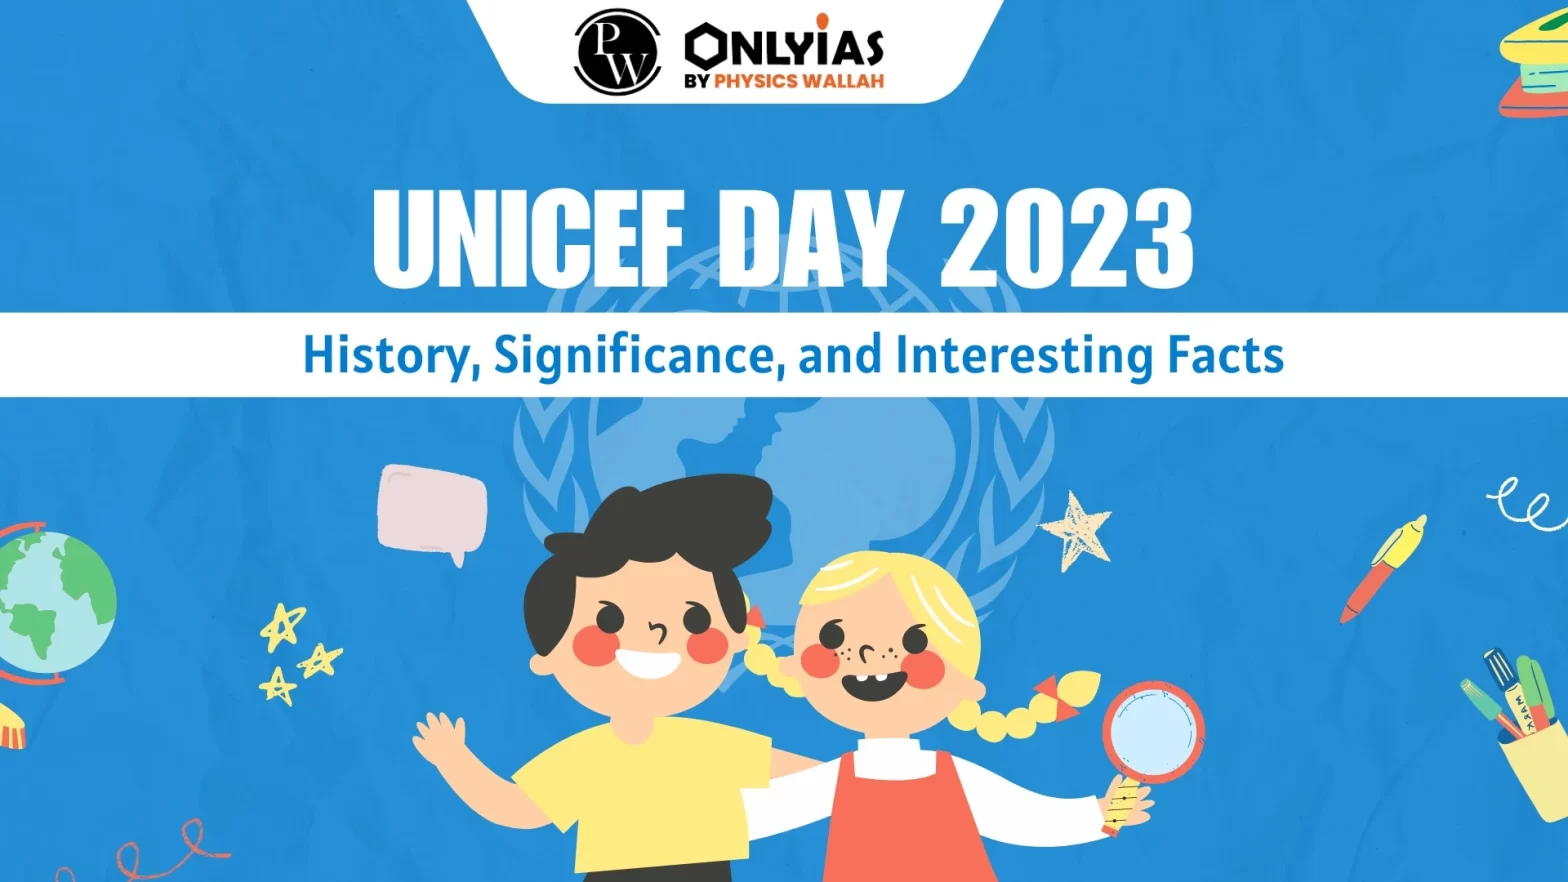 UNICEF Day 2023: History, Significance, and Interesting Facts